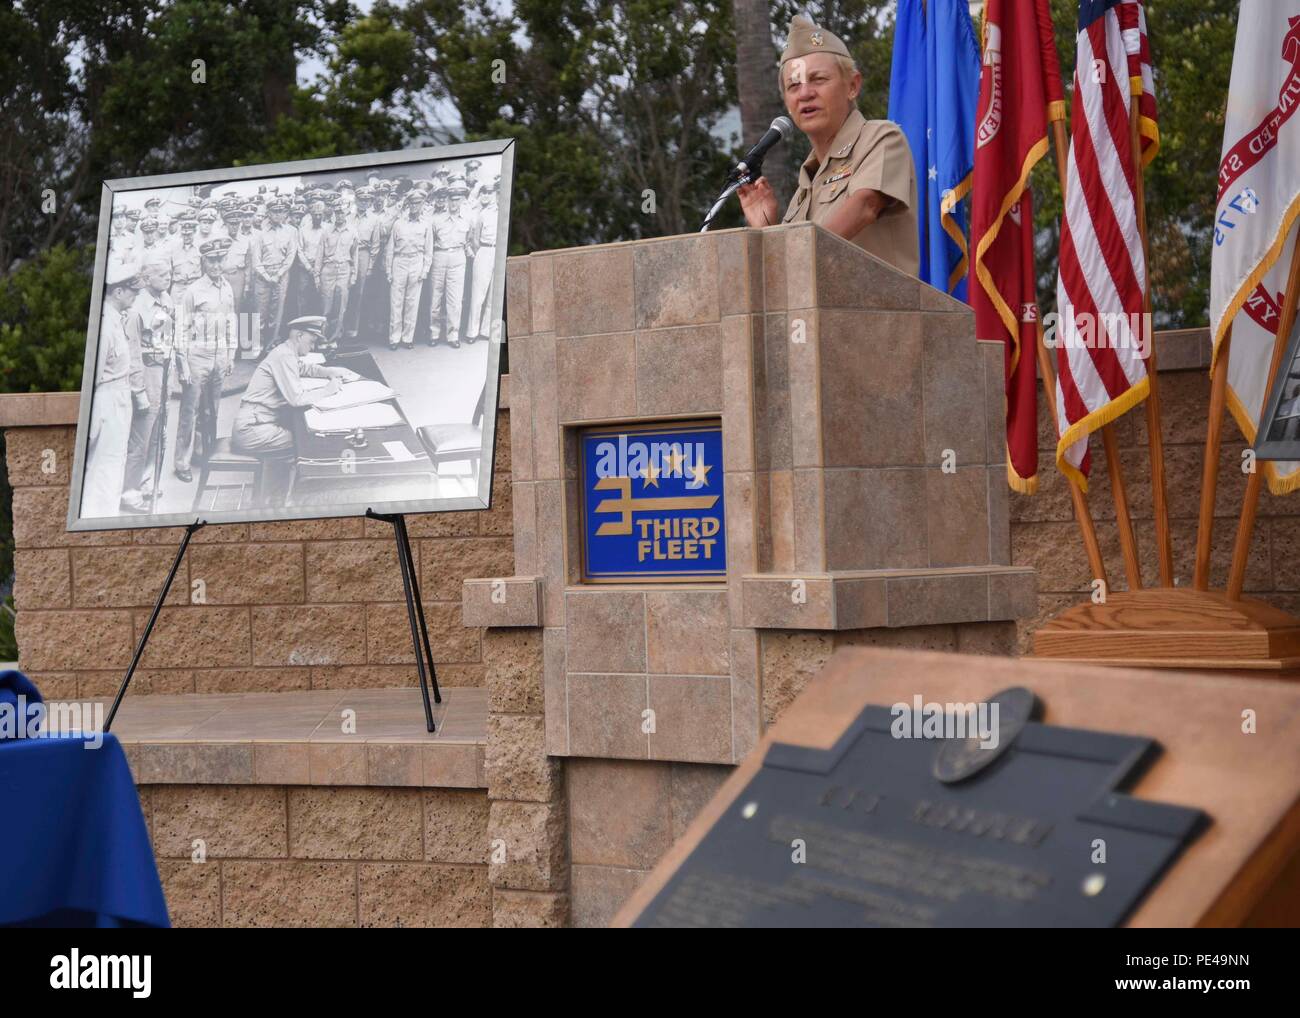 150902-N-JO908-068   SAN DIEGO (Sept. 2, 2015) Vice Adm. Nora Tyson, commander, U.S. 3rd Fleet, delivers remarks during a ceremony at 3rd Fleet Headquarters commemorating the 70th anniversary of the end of World War II. During the war, 3rd Fleet, led by Adm. William 'Bull' Halsey, conducted extensive operations against Japanese forces in the Central Pacific. On September 2, 1945, Japanese representatives signed the official Instrument of Surrender aboard the 3rd Fleet flagship USS Missouri, ending the war. (U.S. Navy photo By Mass Communication Specialist 2nd Class Kory Alsberry/Released) Stock Photo